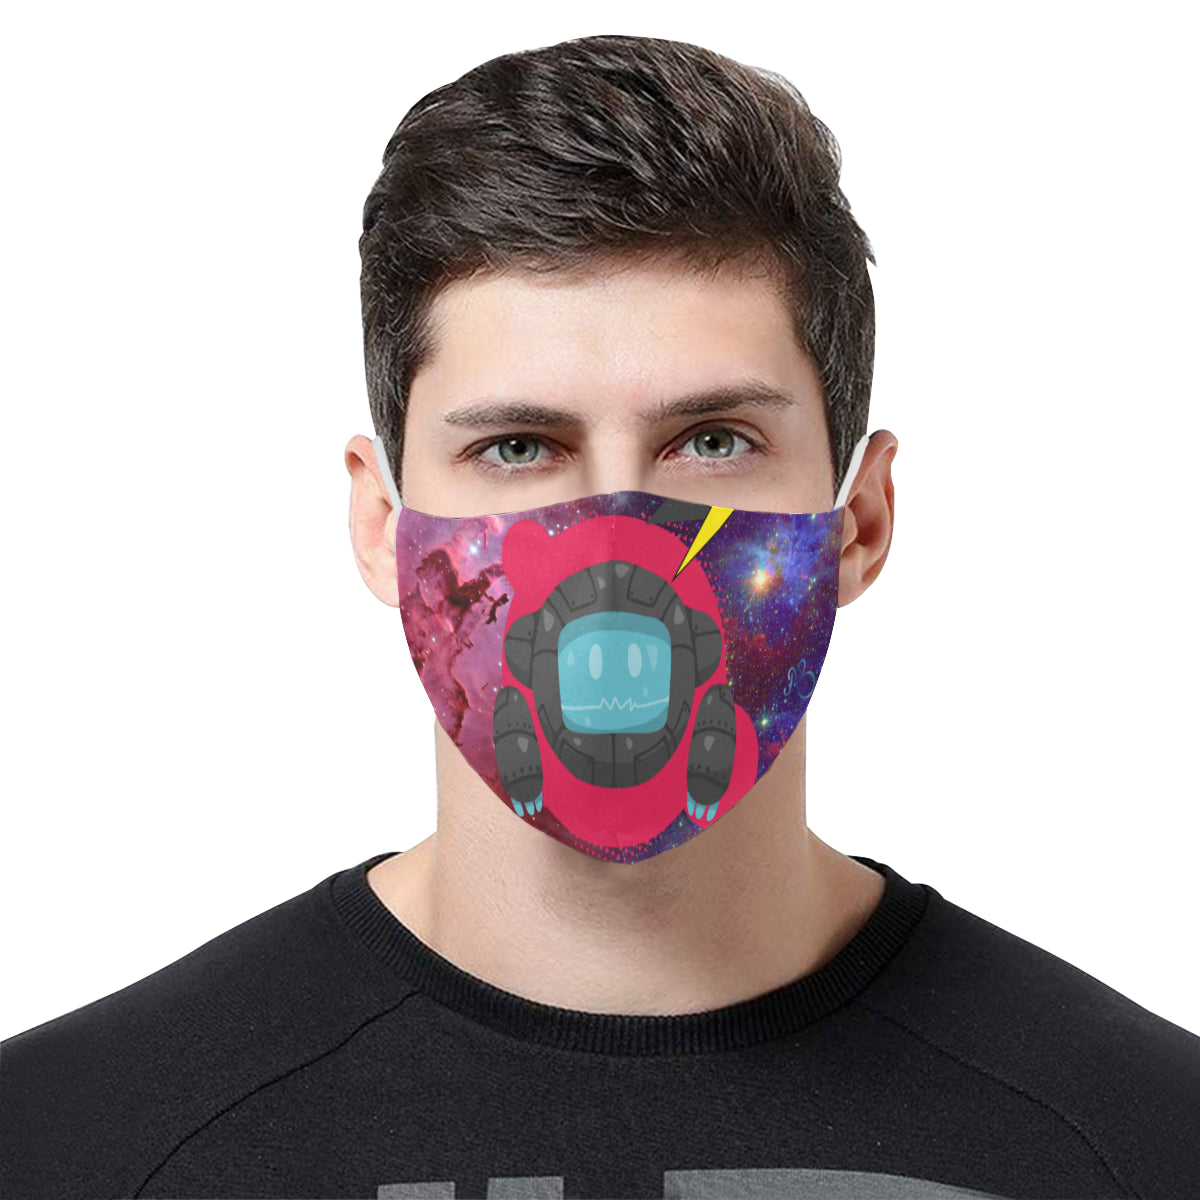 Astronaut Cotton Fabric Face Mask with Filter Slot & Adjustable Strap (Pack of 5) - Non-medical use